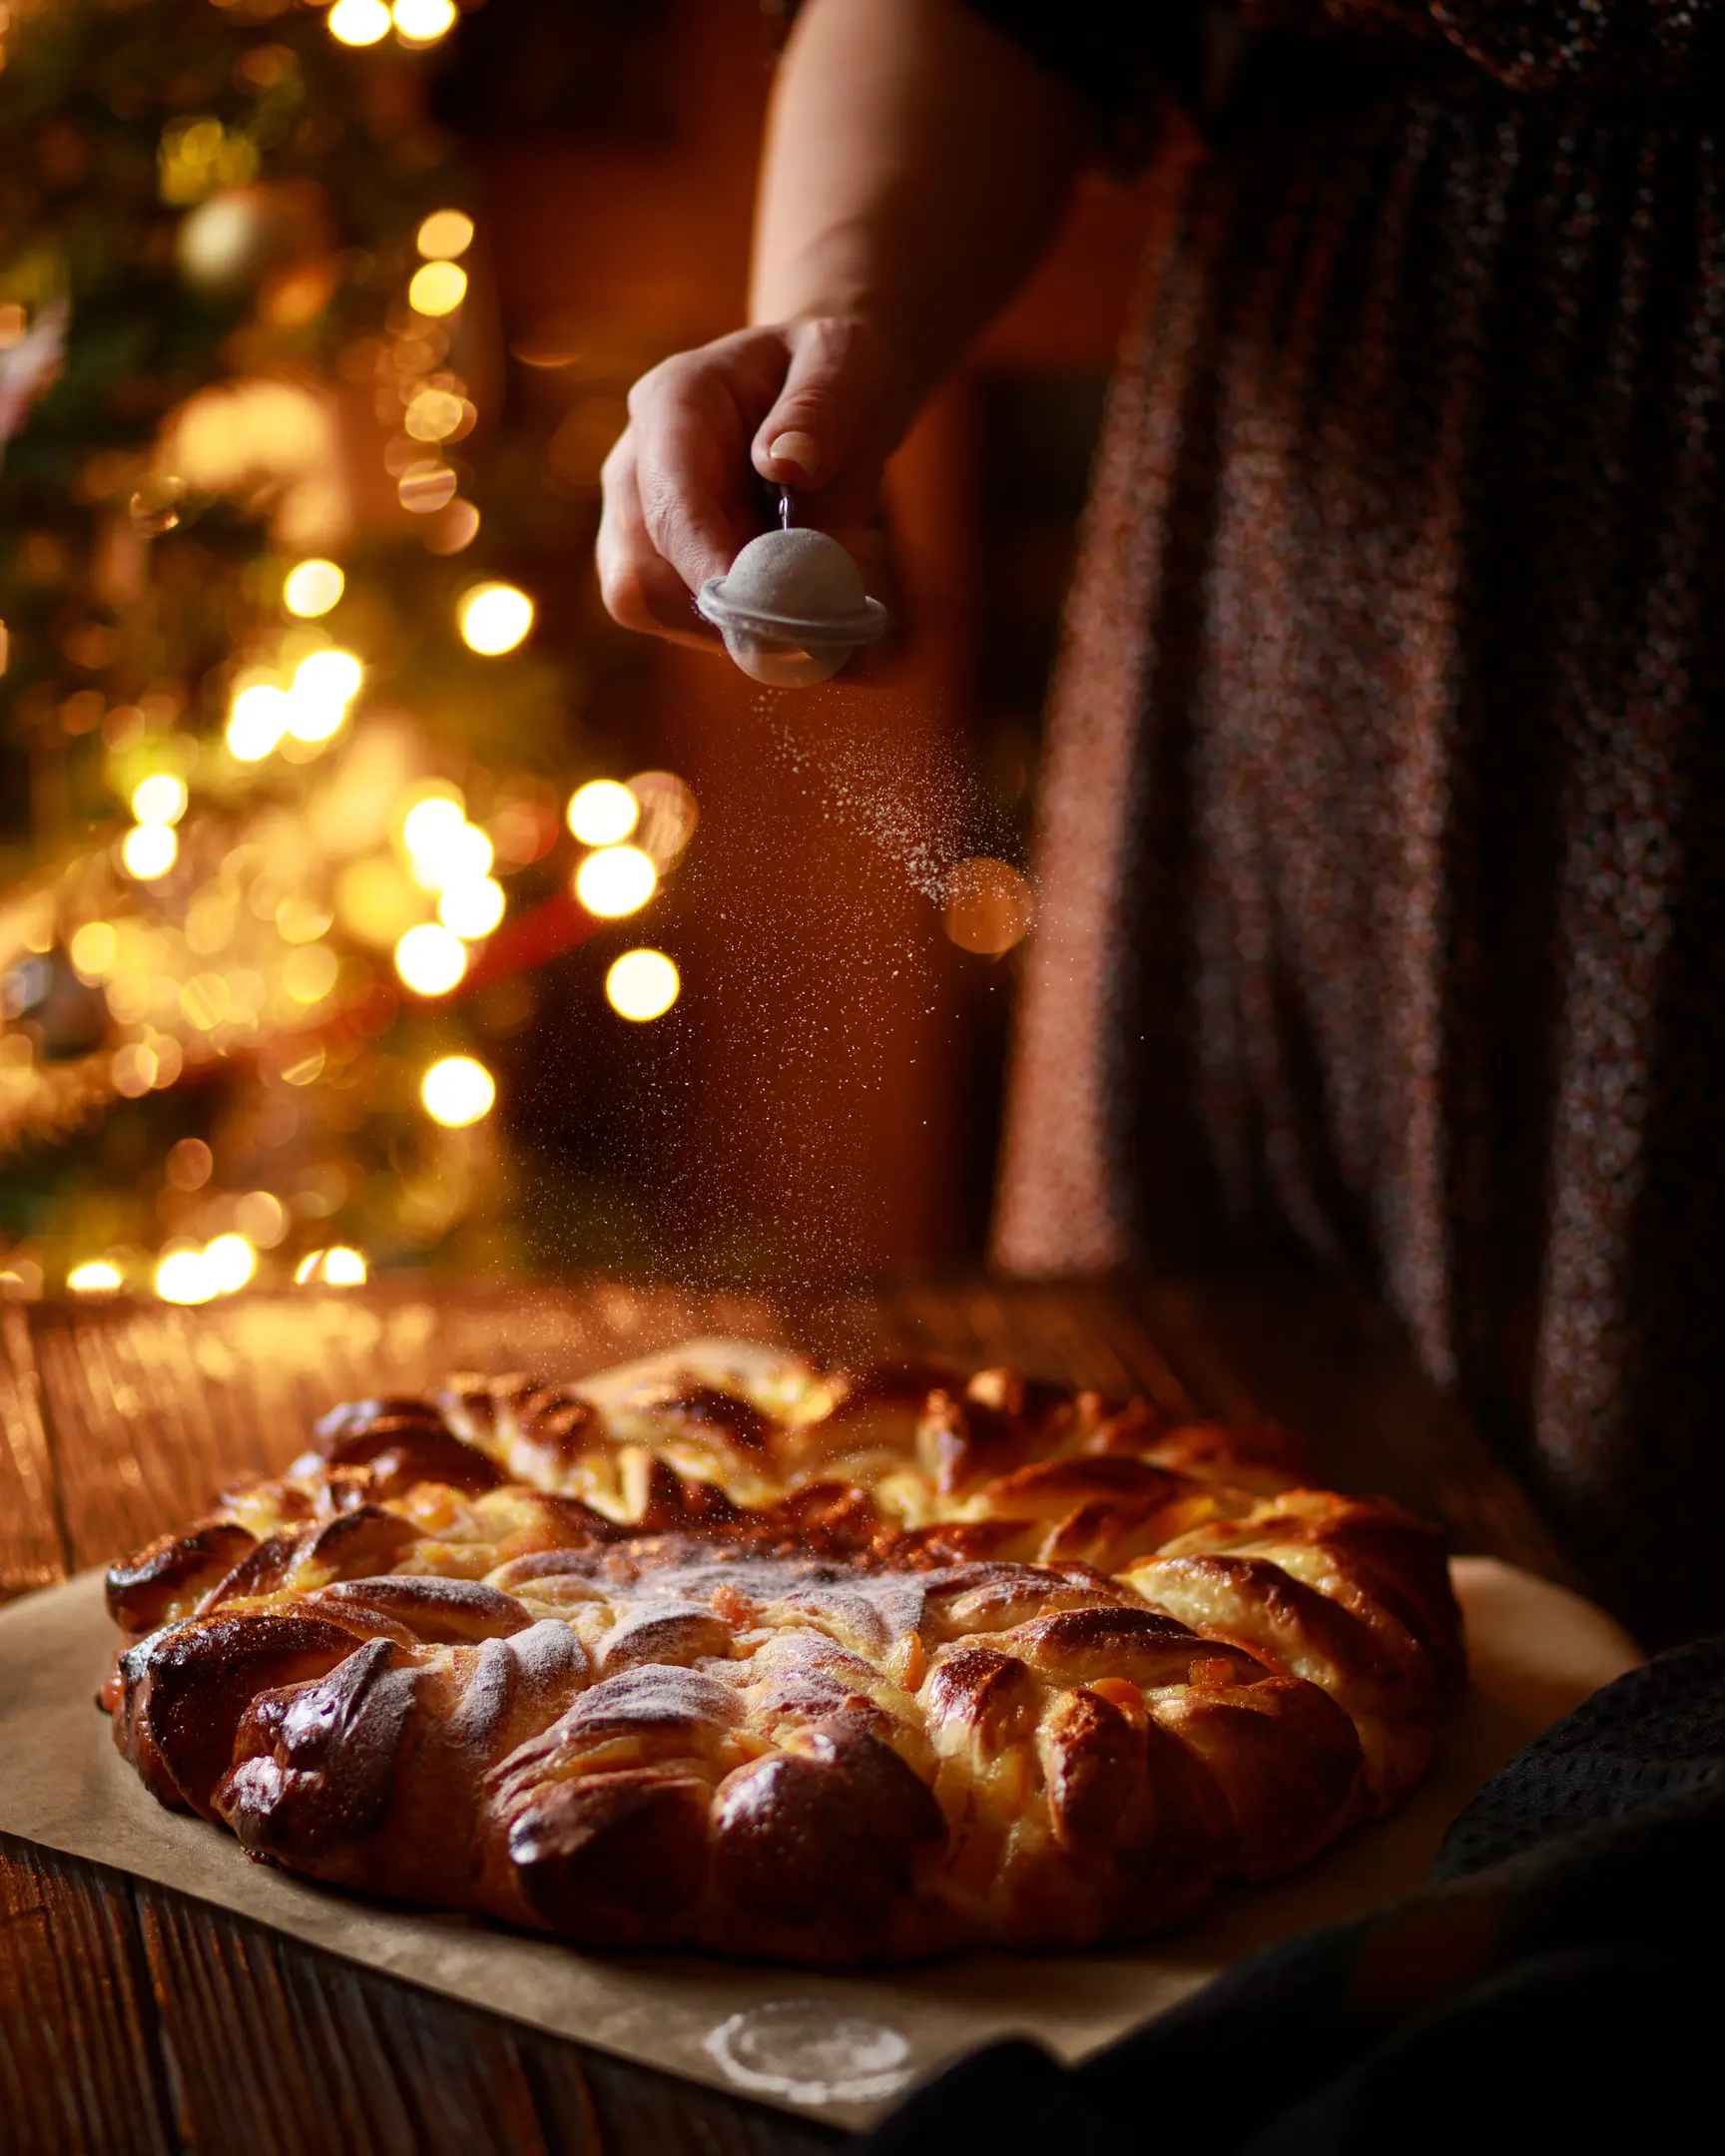 On it is a star-shaped cake Against the background of flickering lights from the Christmas tree is a table. On it is a star-shaped cake. A woman sprinkles powdered sugar on top of a cake.